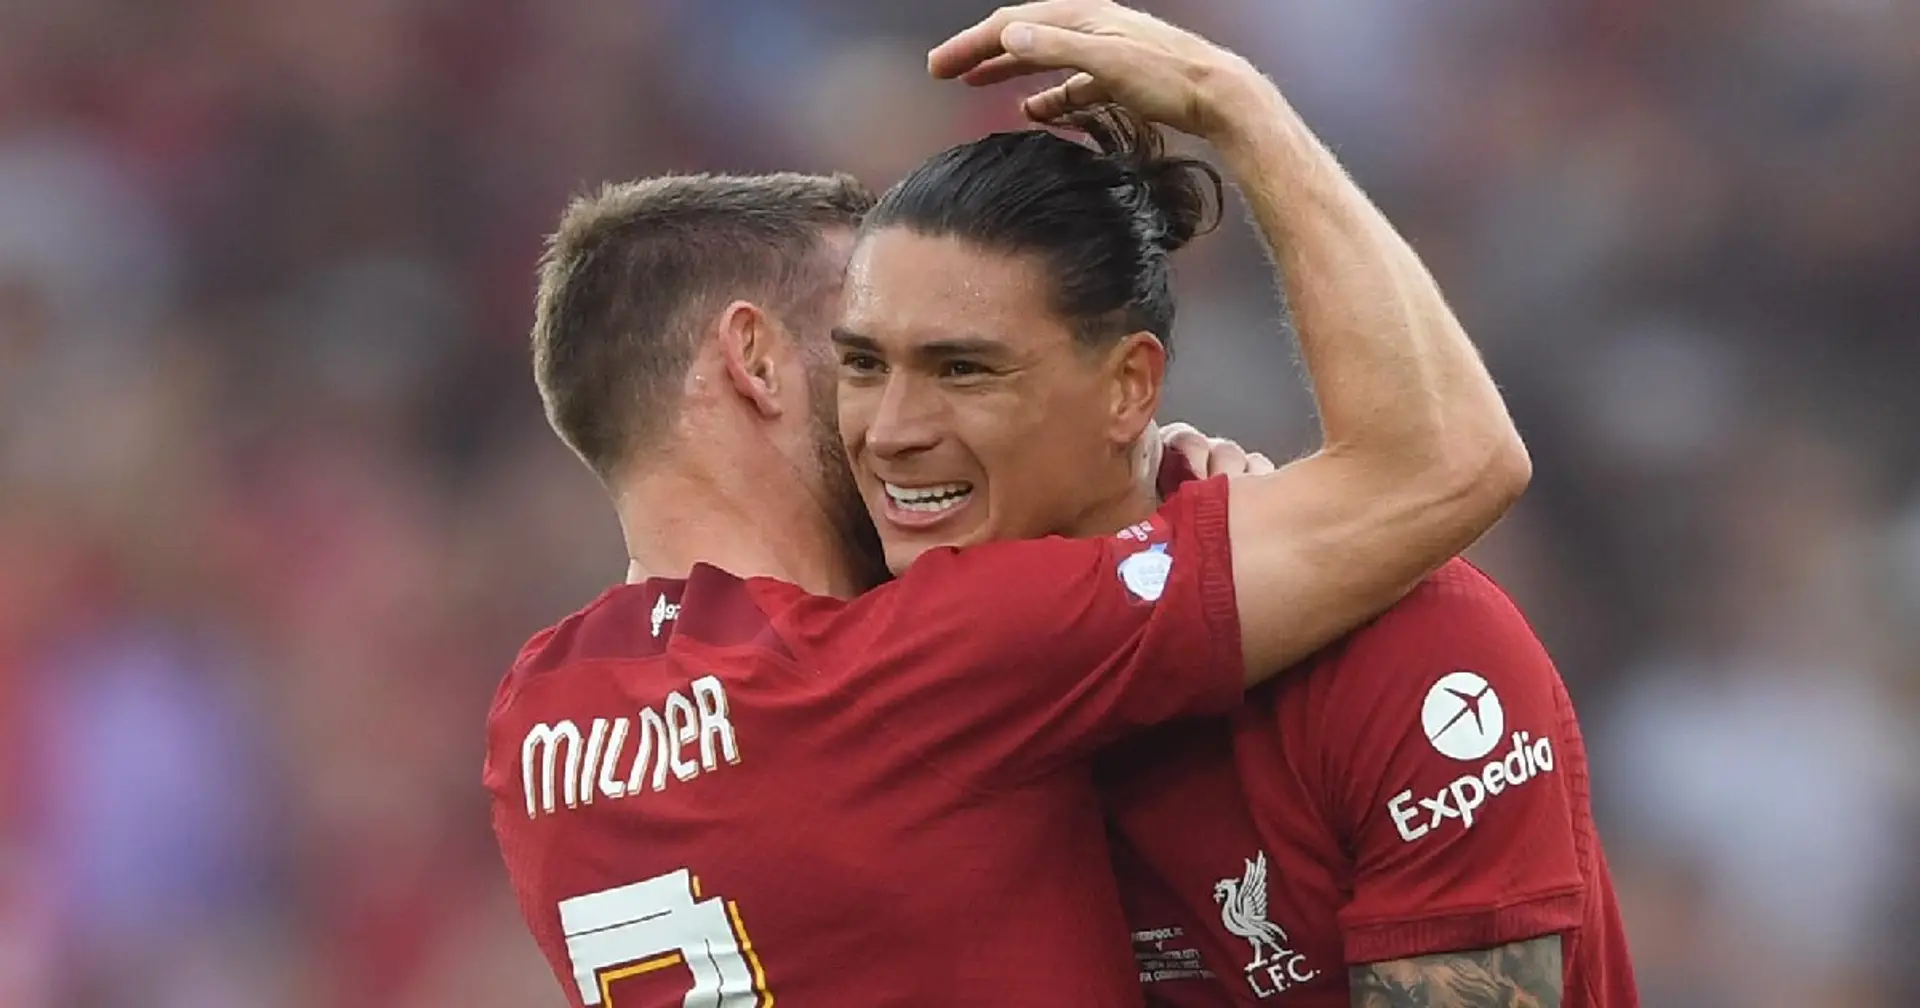 'He's different to the other boys up there': Milner tips Nunez to have long-term impact at Liverpool